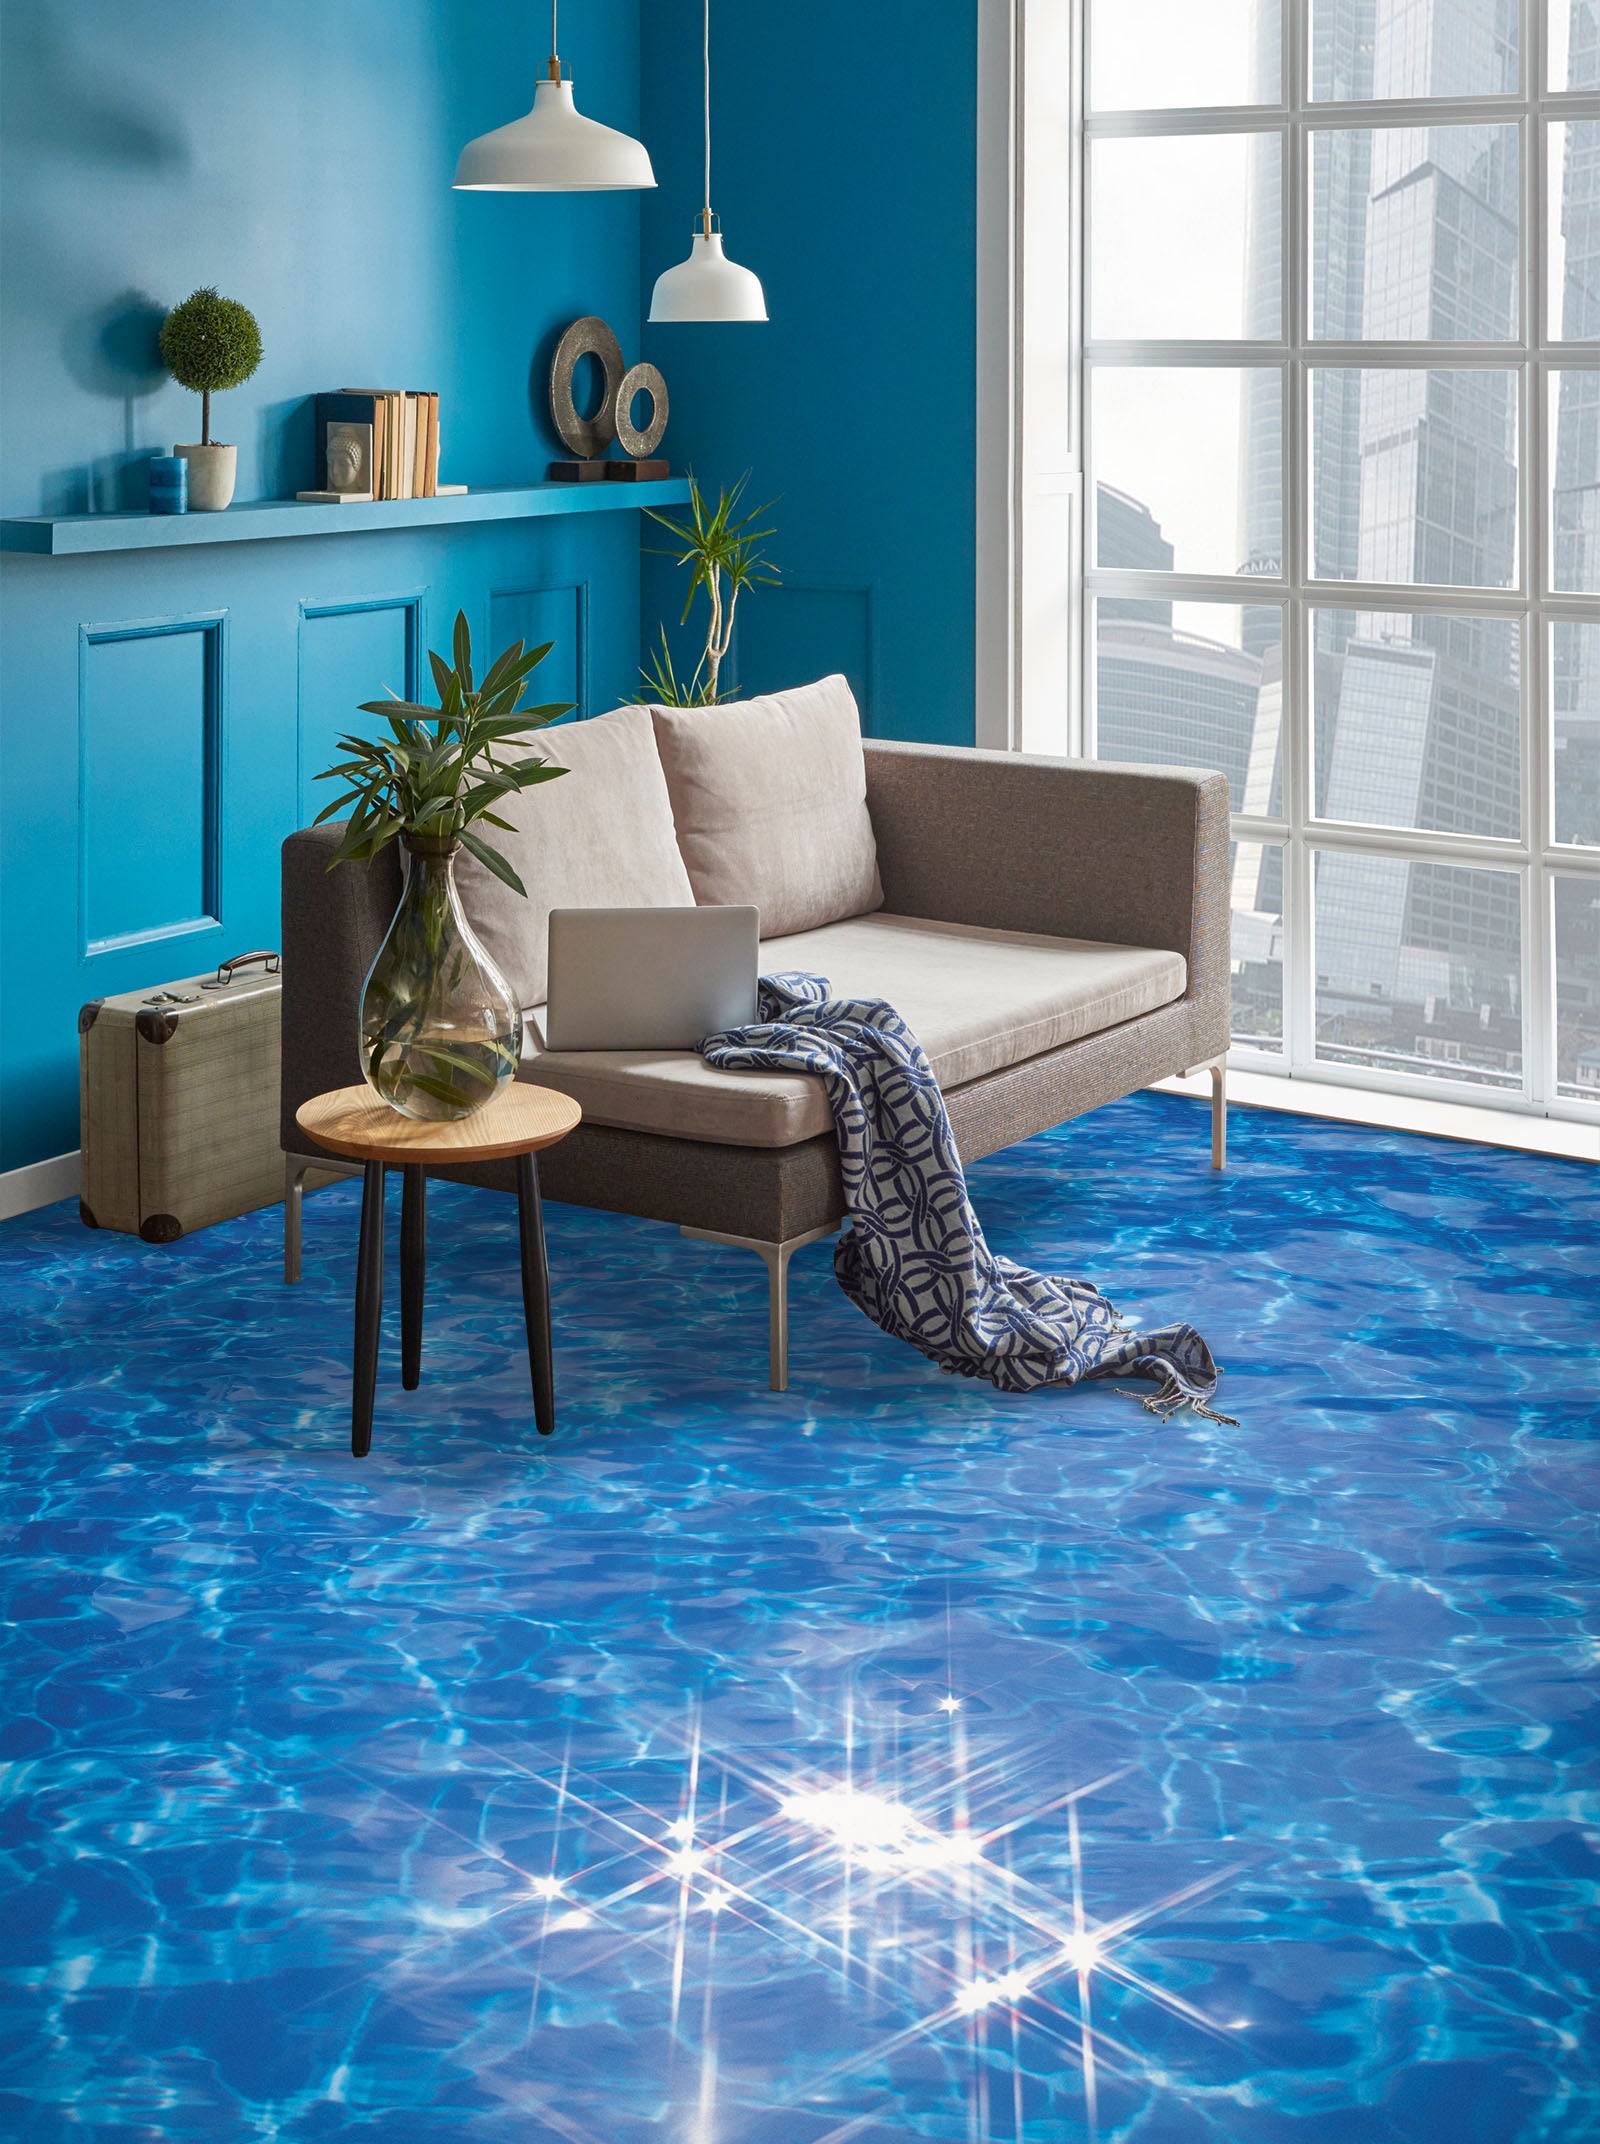 3D Light Art In The Water 1481 Floor Mural  Wallpaper Murals Self-Adhesive Removable Print Epoxy